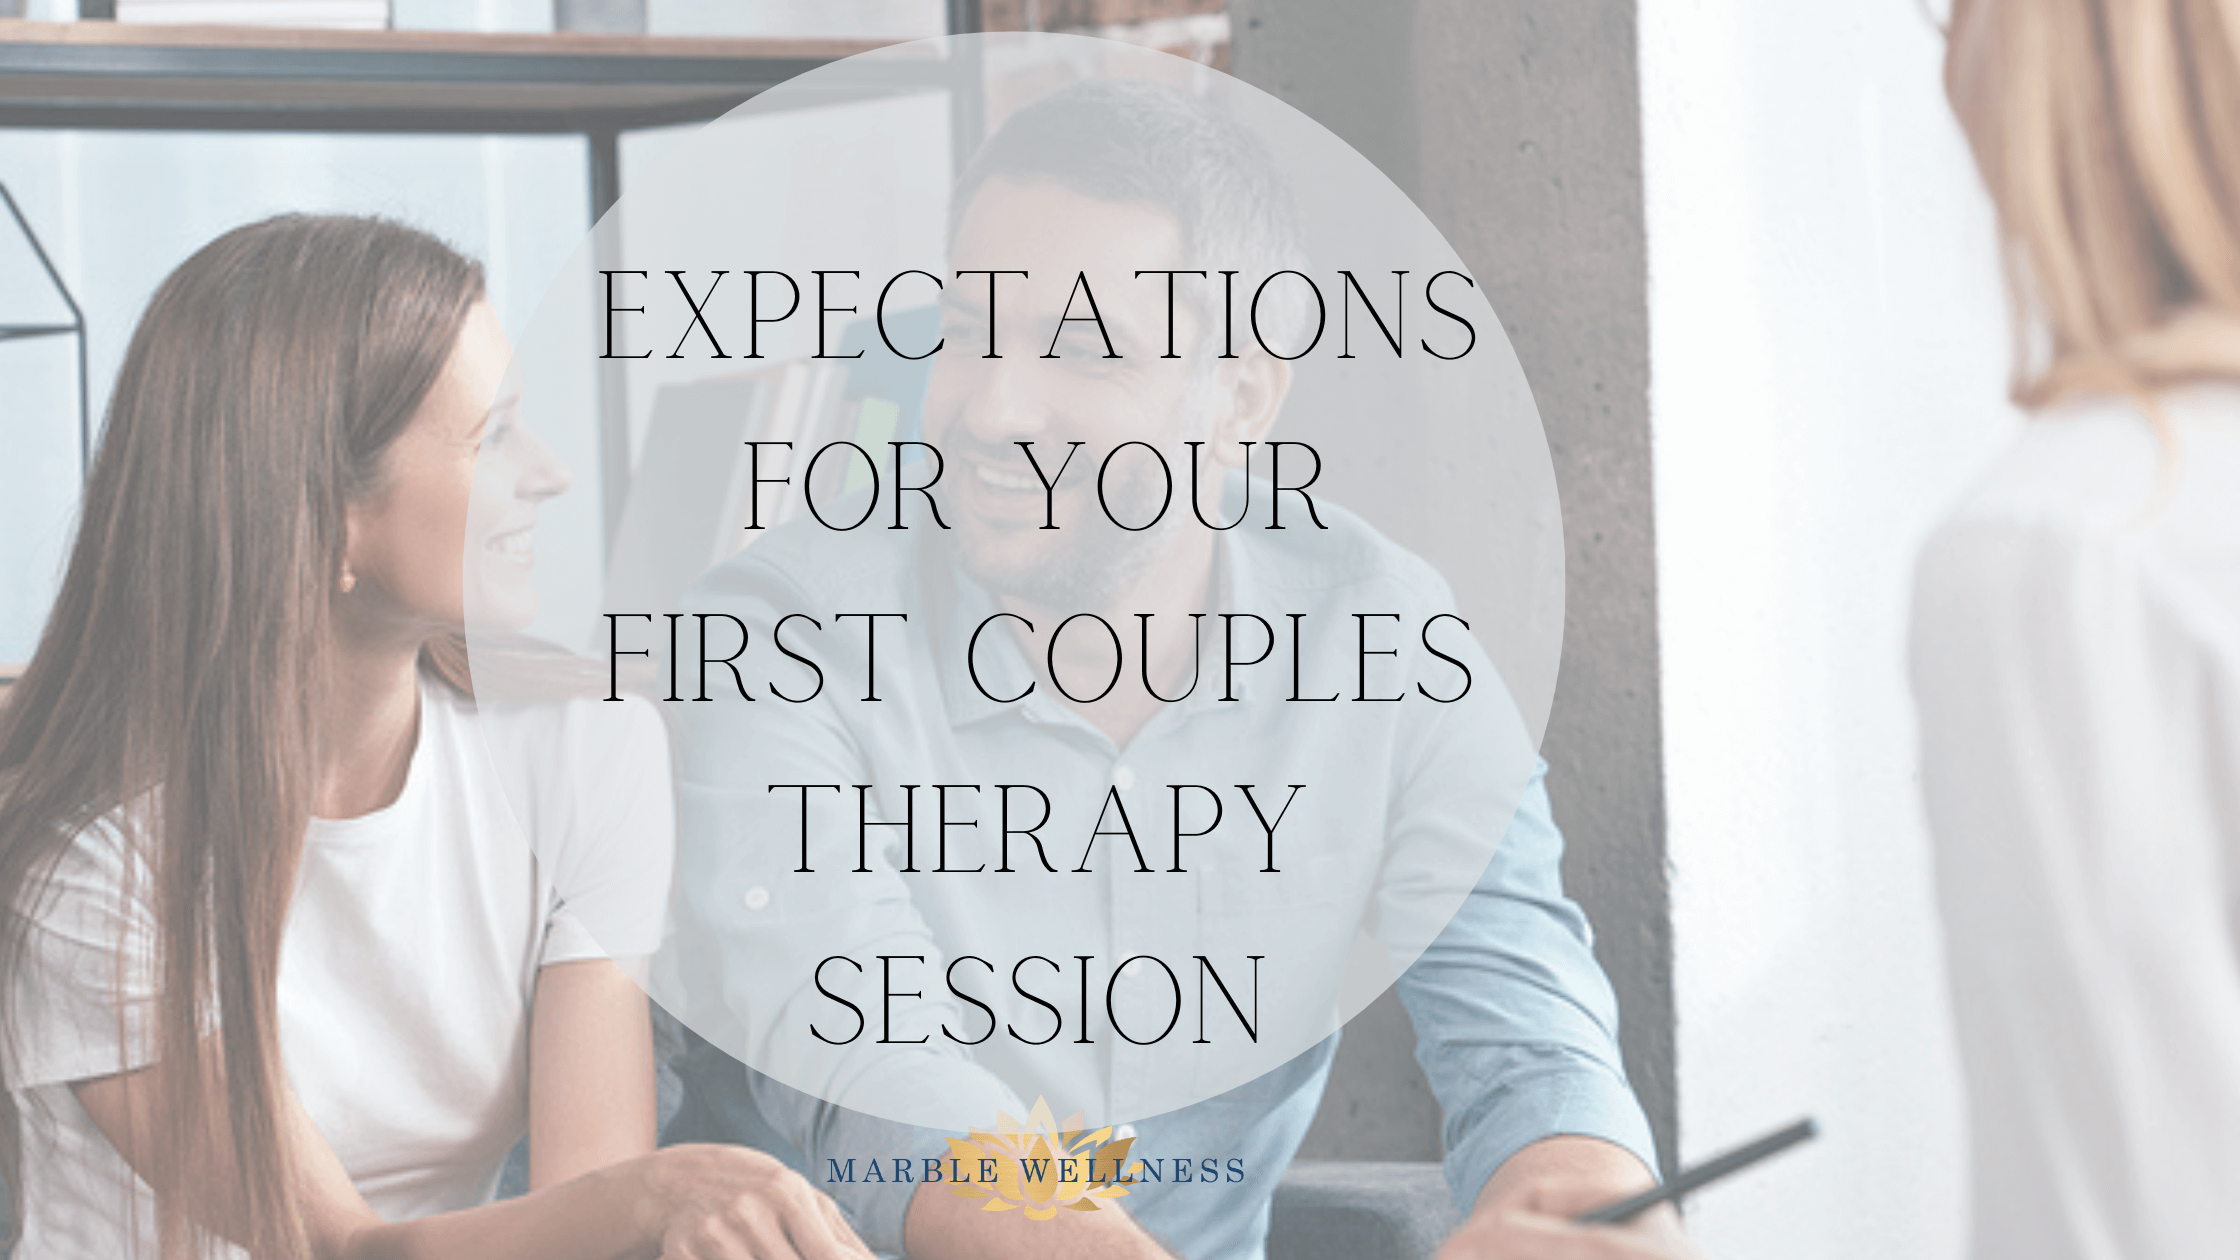 Cover art for "Expectations for your first couples therapy session". Marble Wellness is located in West County, MO 63011 and specializes in couples counseling and much more.